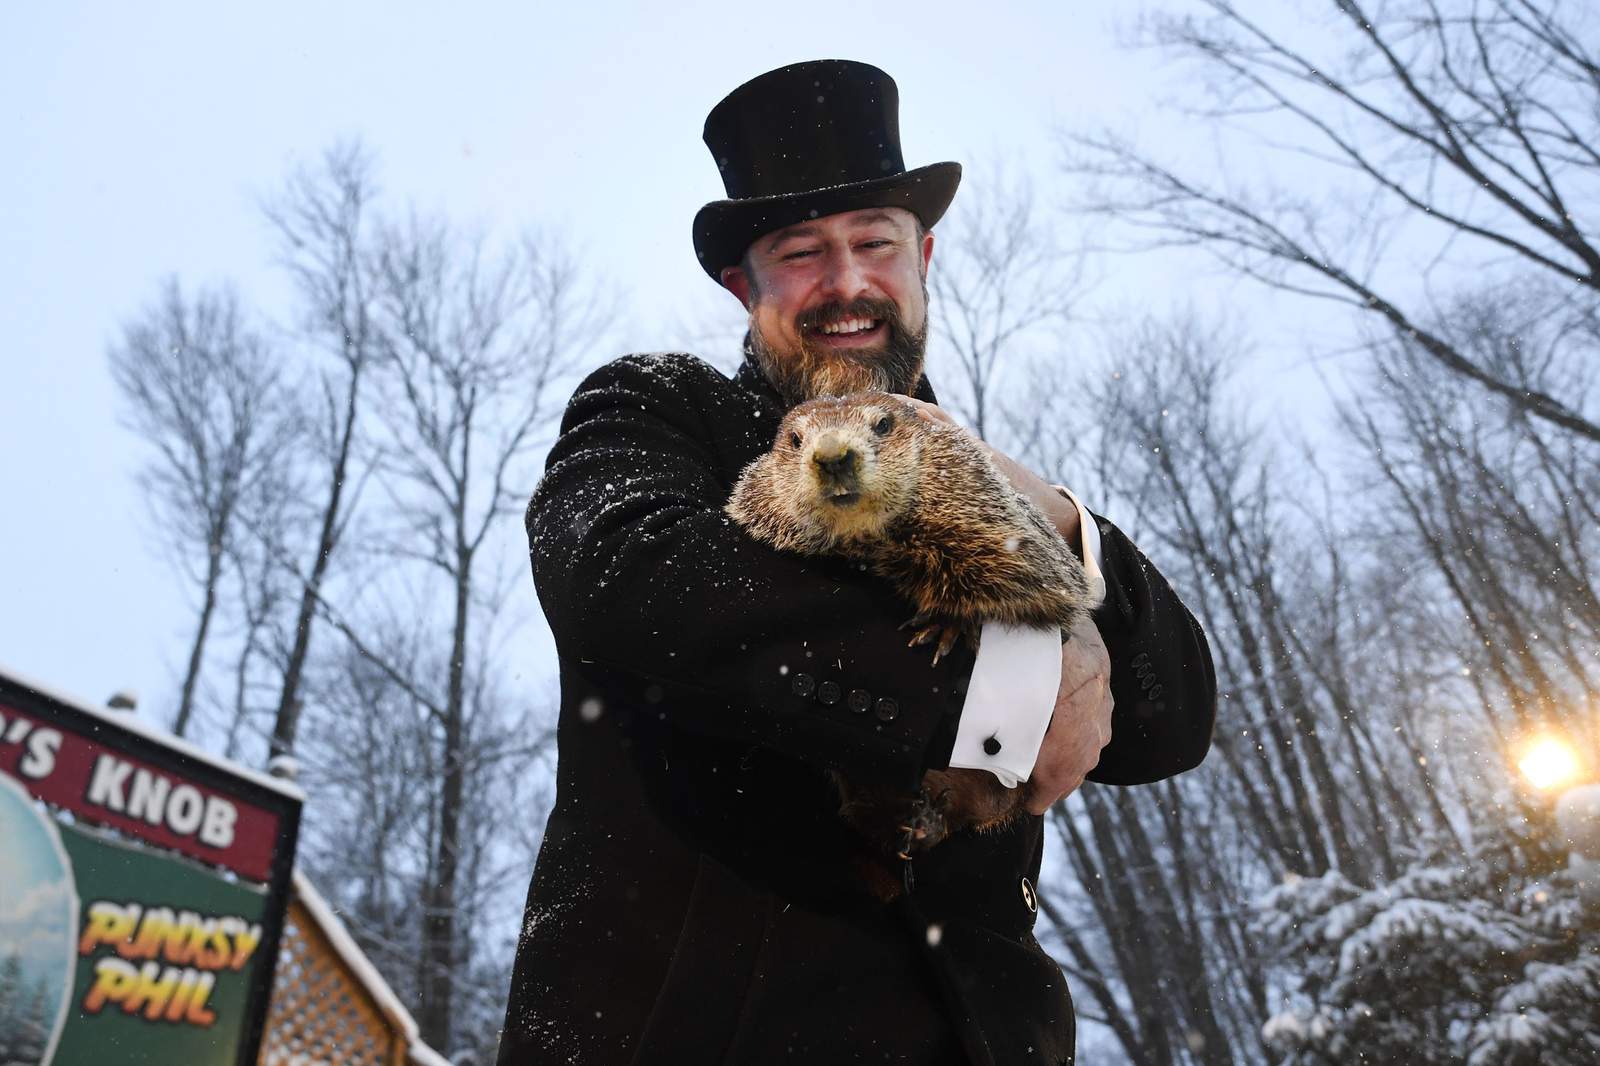 How accurate are Punxsutawney Phil’s forecasts?